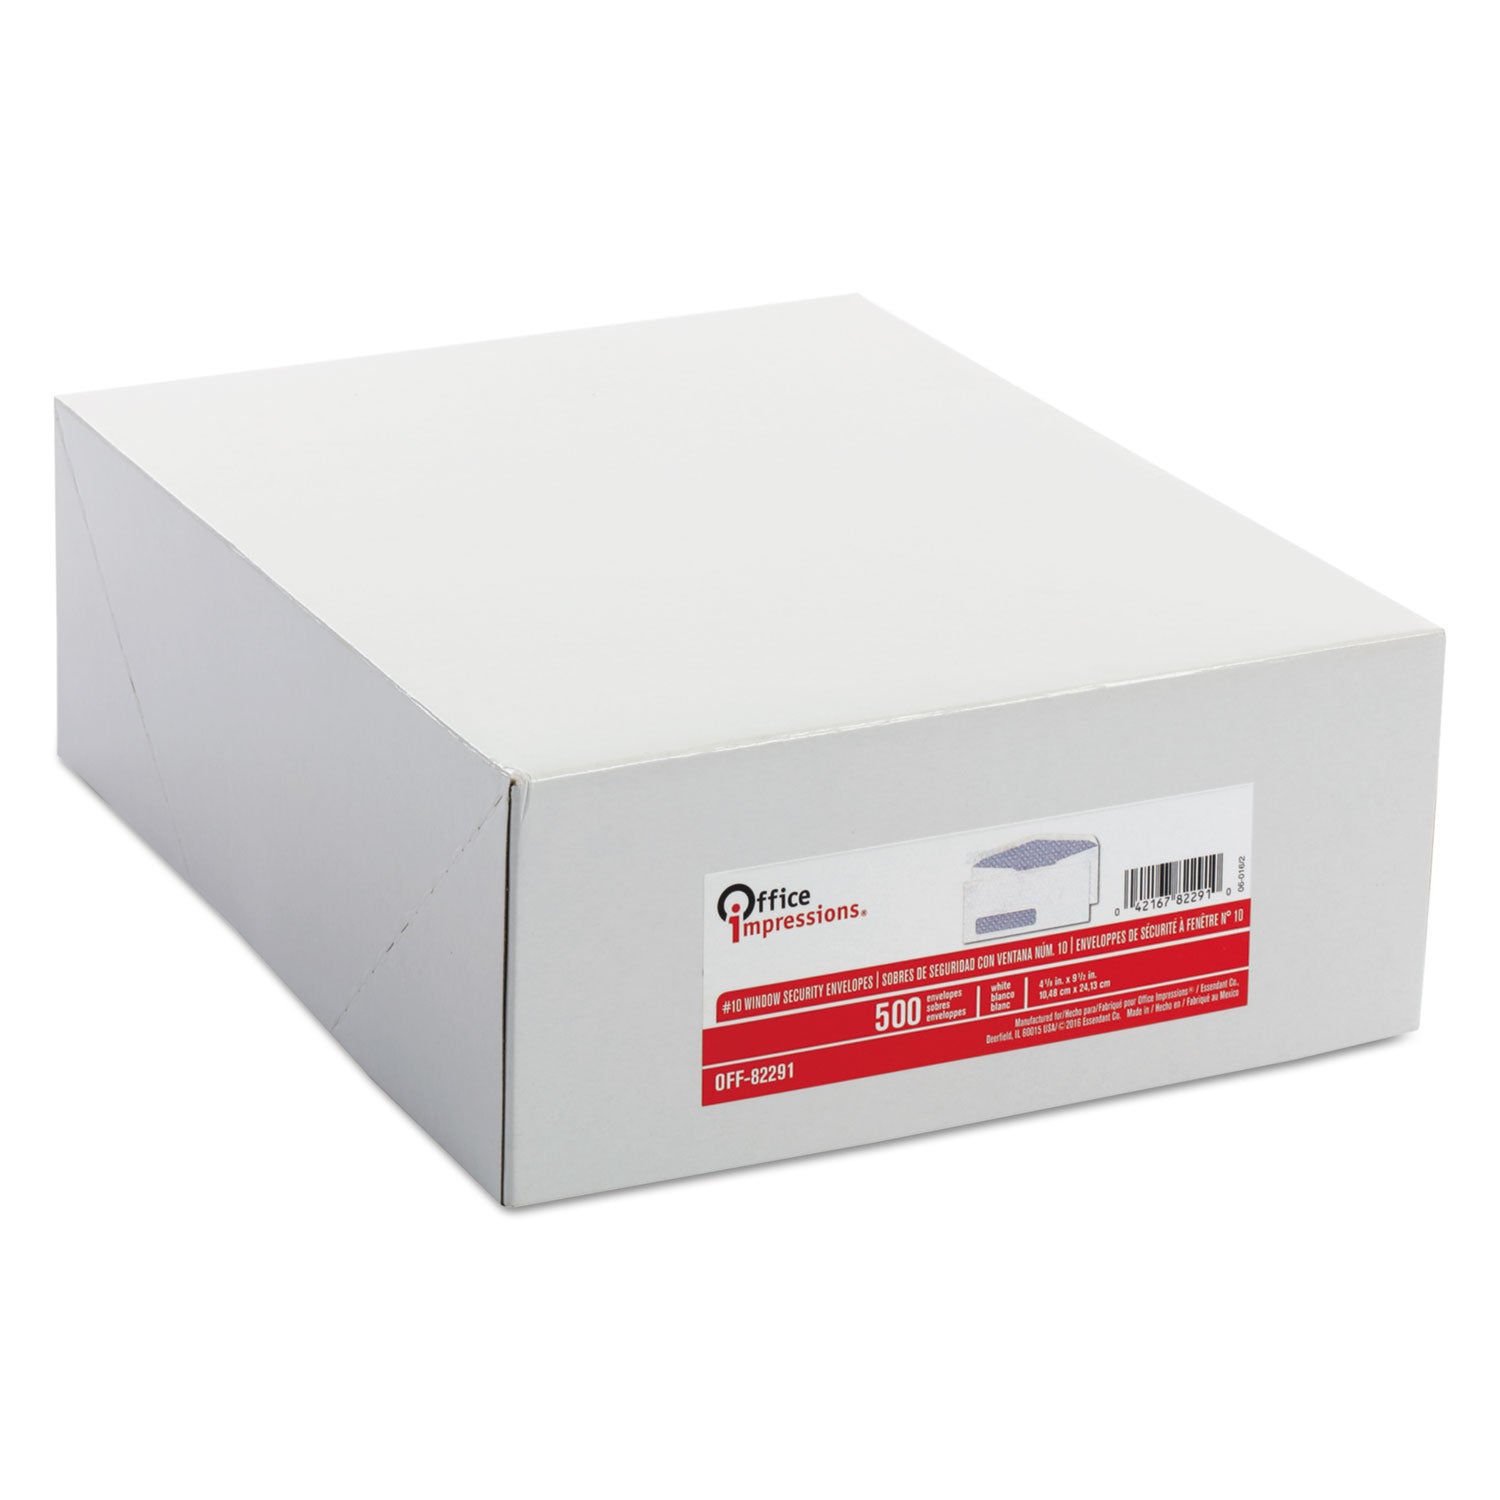 #10-trade-size-security-tint-envelope-commercial-flap-gummed-closure-413-x-95-white-500-box_off82291 - 2